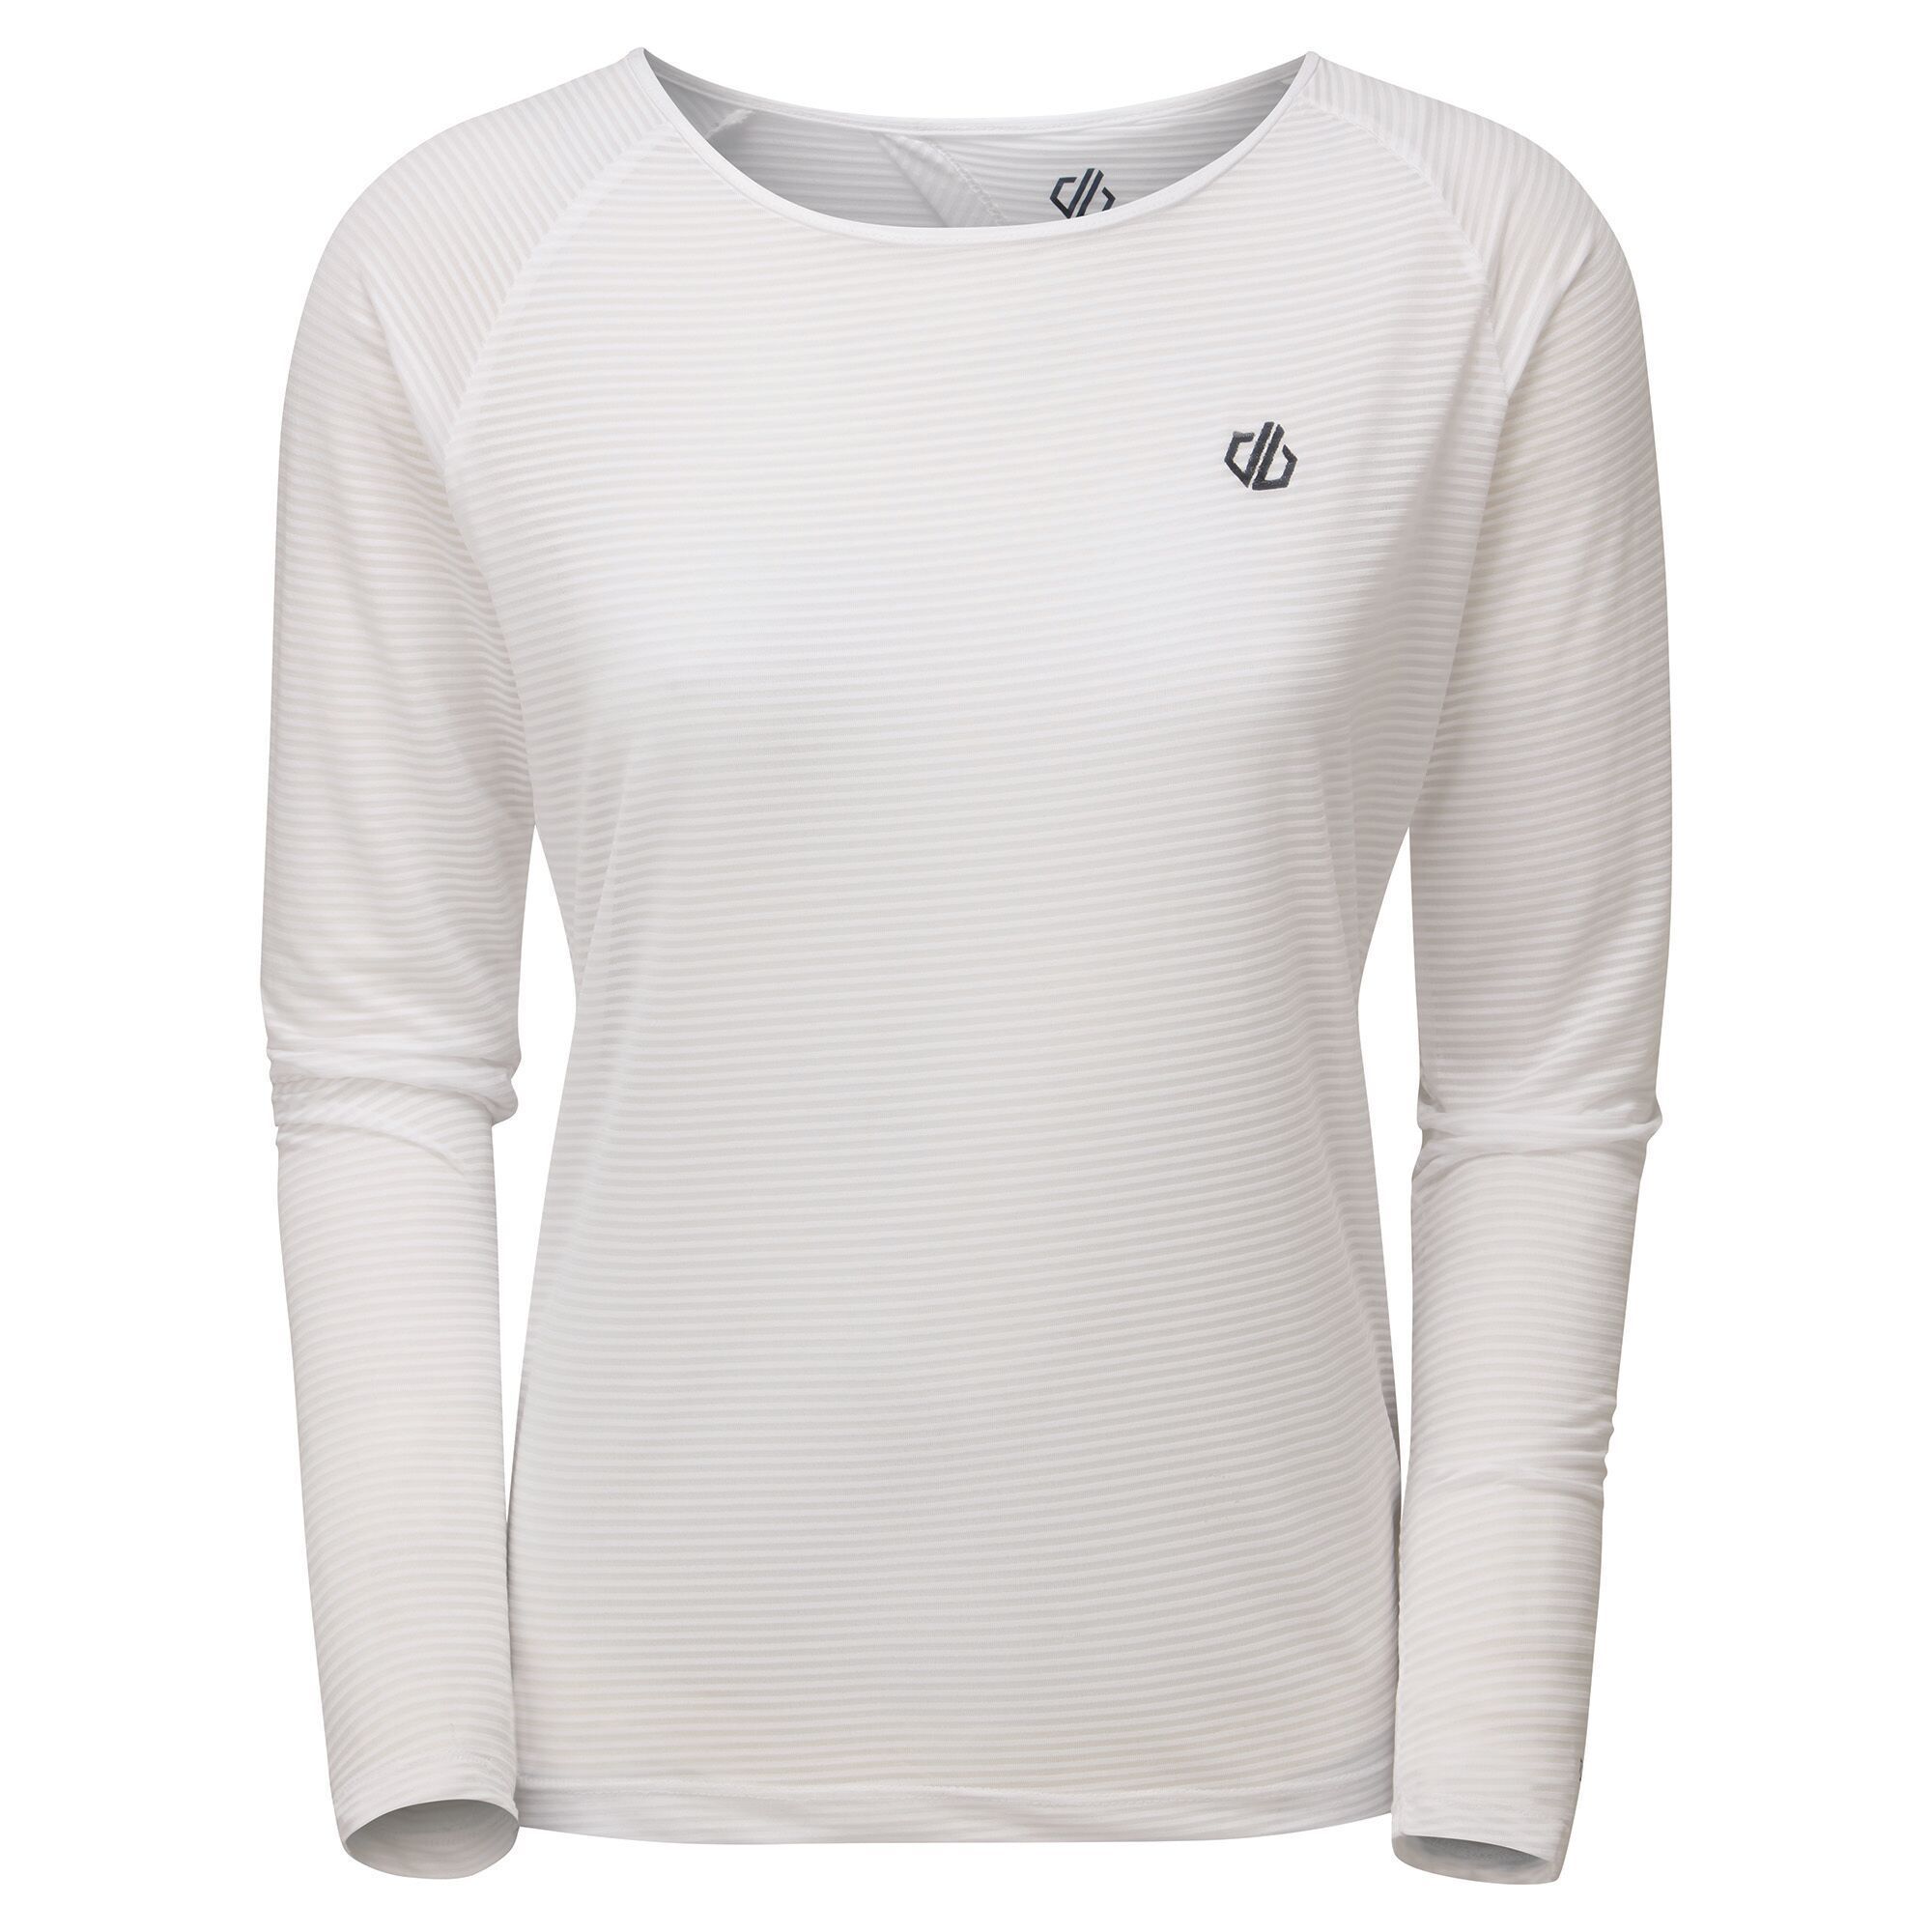 Material: 100% Polyester (Q-Wic Plus lightweight polyester fabric.) Long sleeved workout top with crossover cutout back design and scooped round neck. Features anti-bacterial odour control treatment and motion-friendly sleeve design.